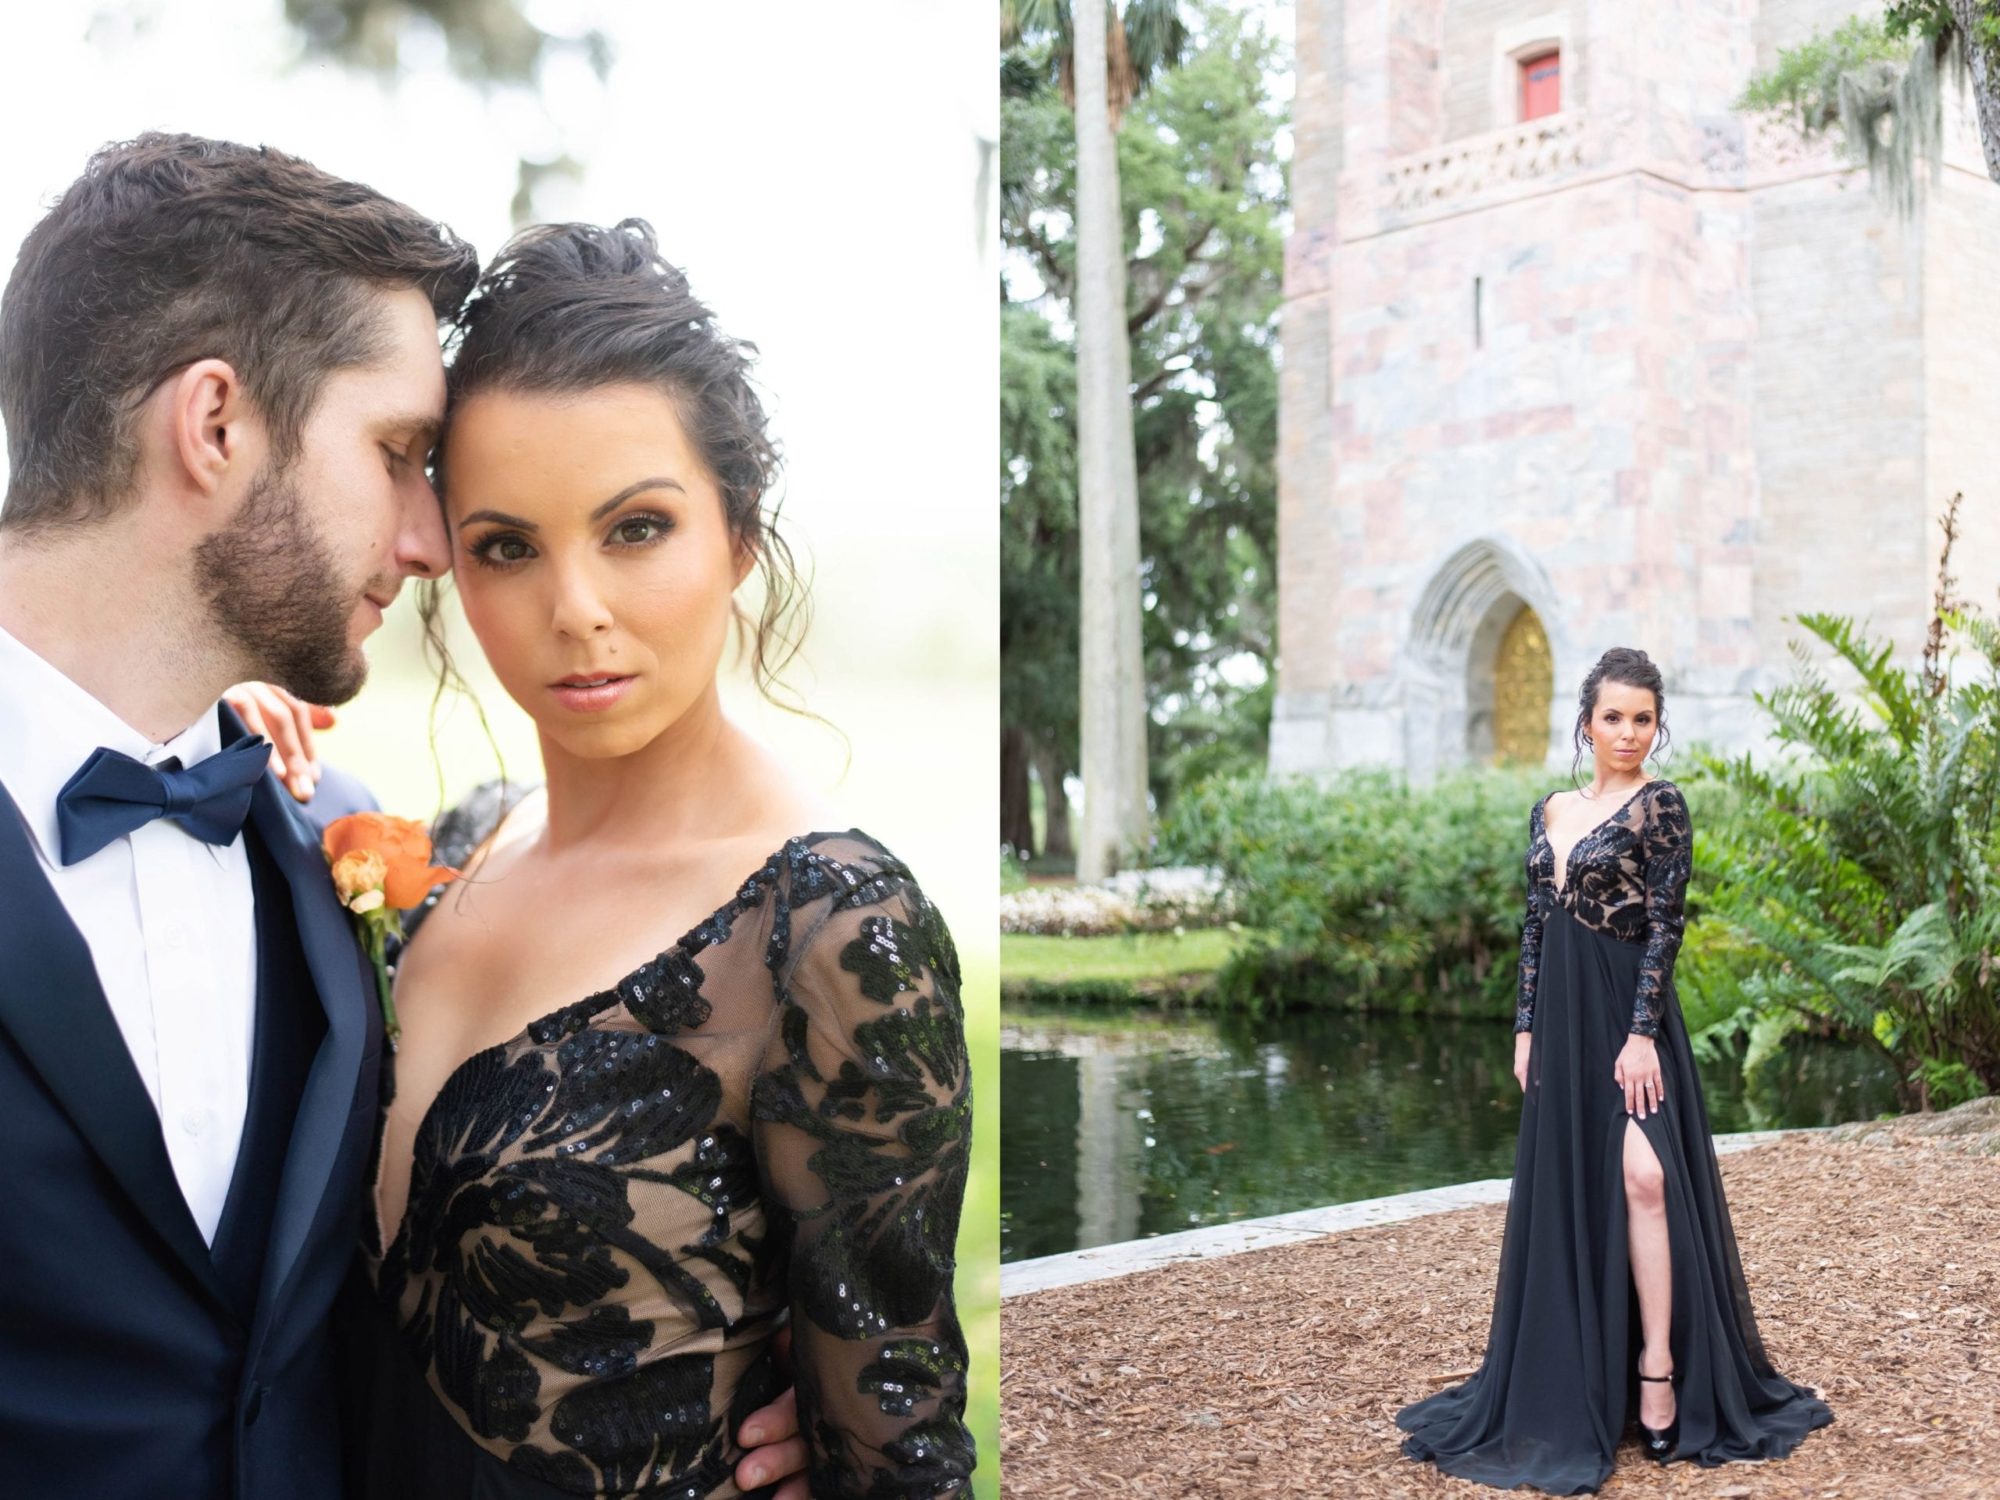 Whimsical Citrus Bok Tower Gardens Wedding in Lake Wakes, Florida bride in elegant black lace dress with slit and groom in navy tuxedo hugging embracing by the singing tower